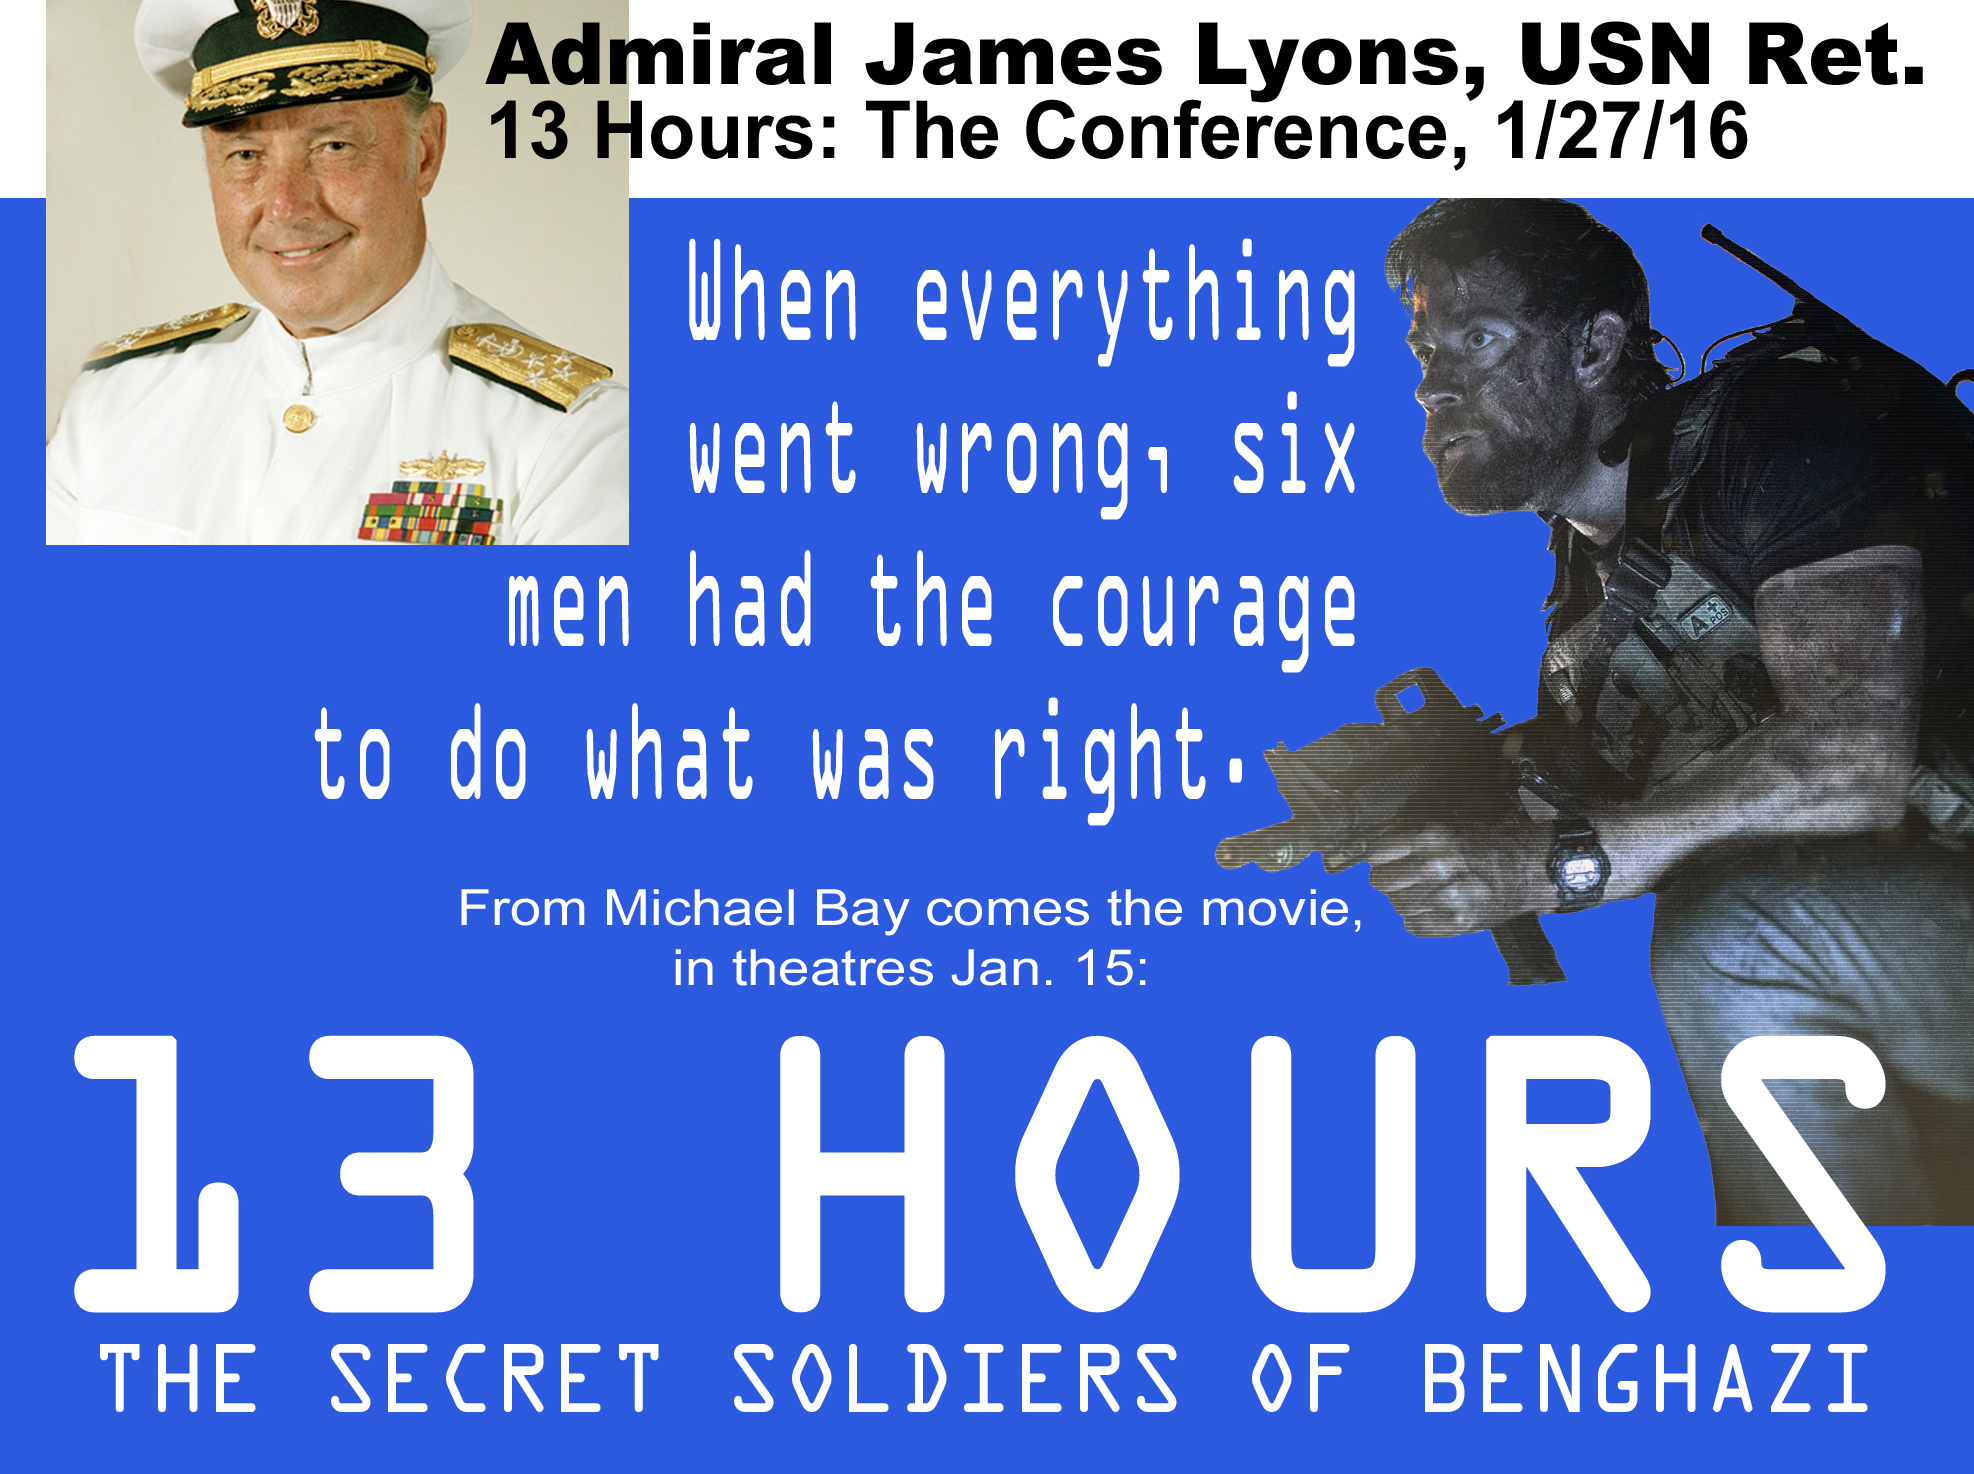 It will be difficult for the media to continue to help President Obama and former Secretary of State Hillary Clinton continue their coverup of the truth about how they abandoned Americans to die at Benghazi and then lied about it afterwards, with the hoped for success of this new movie 13 HOURS: The Secret Soldiers of Benghazi.